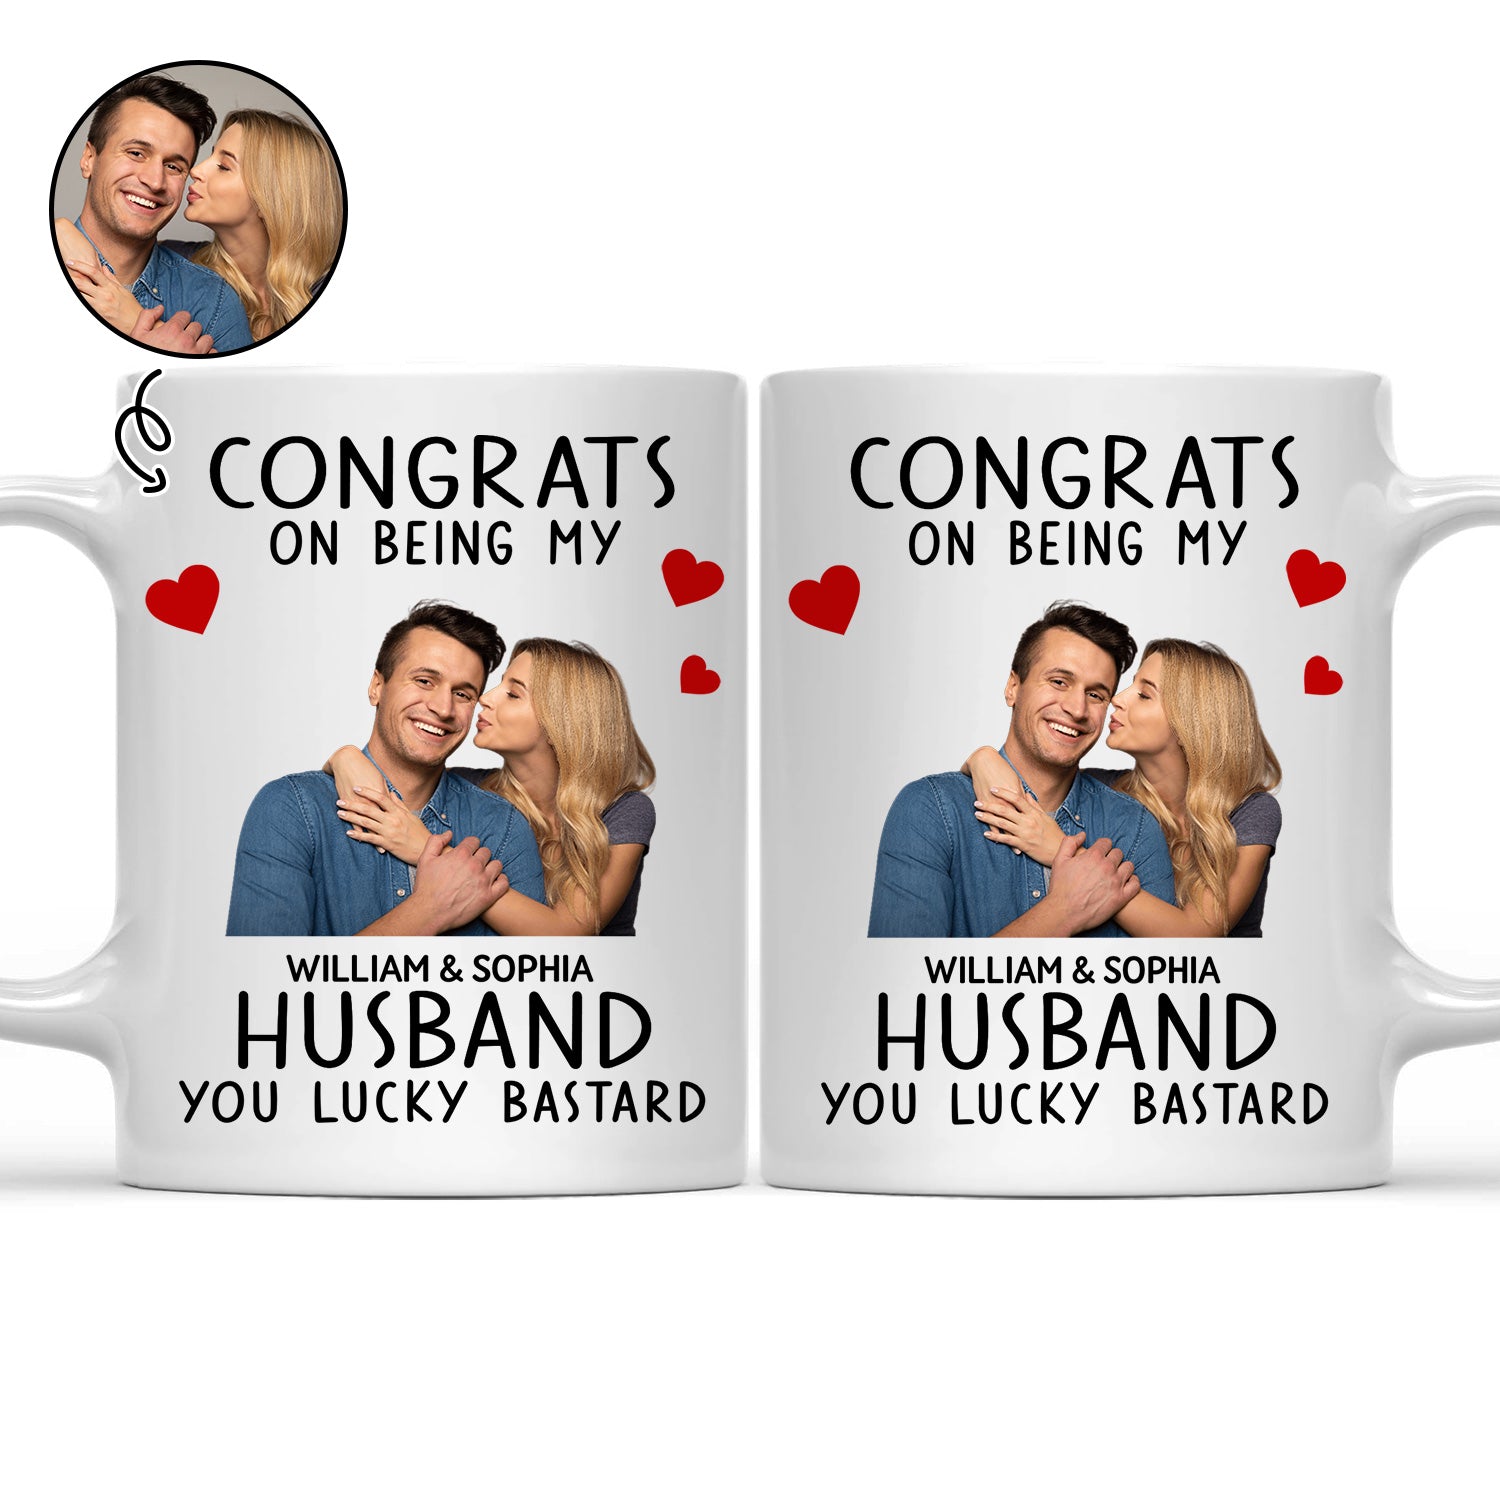 Custom Photo Congrats On Being My Husband - Anniversary, Vacation, Funny Gift For Couples, Family - Personalized Mug